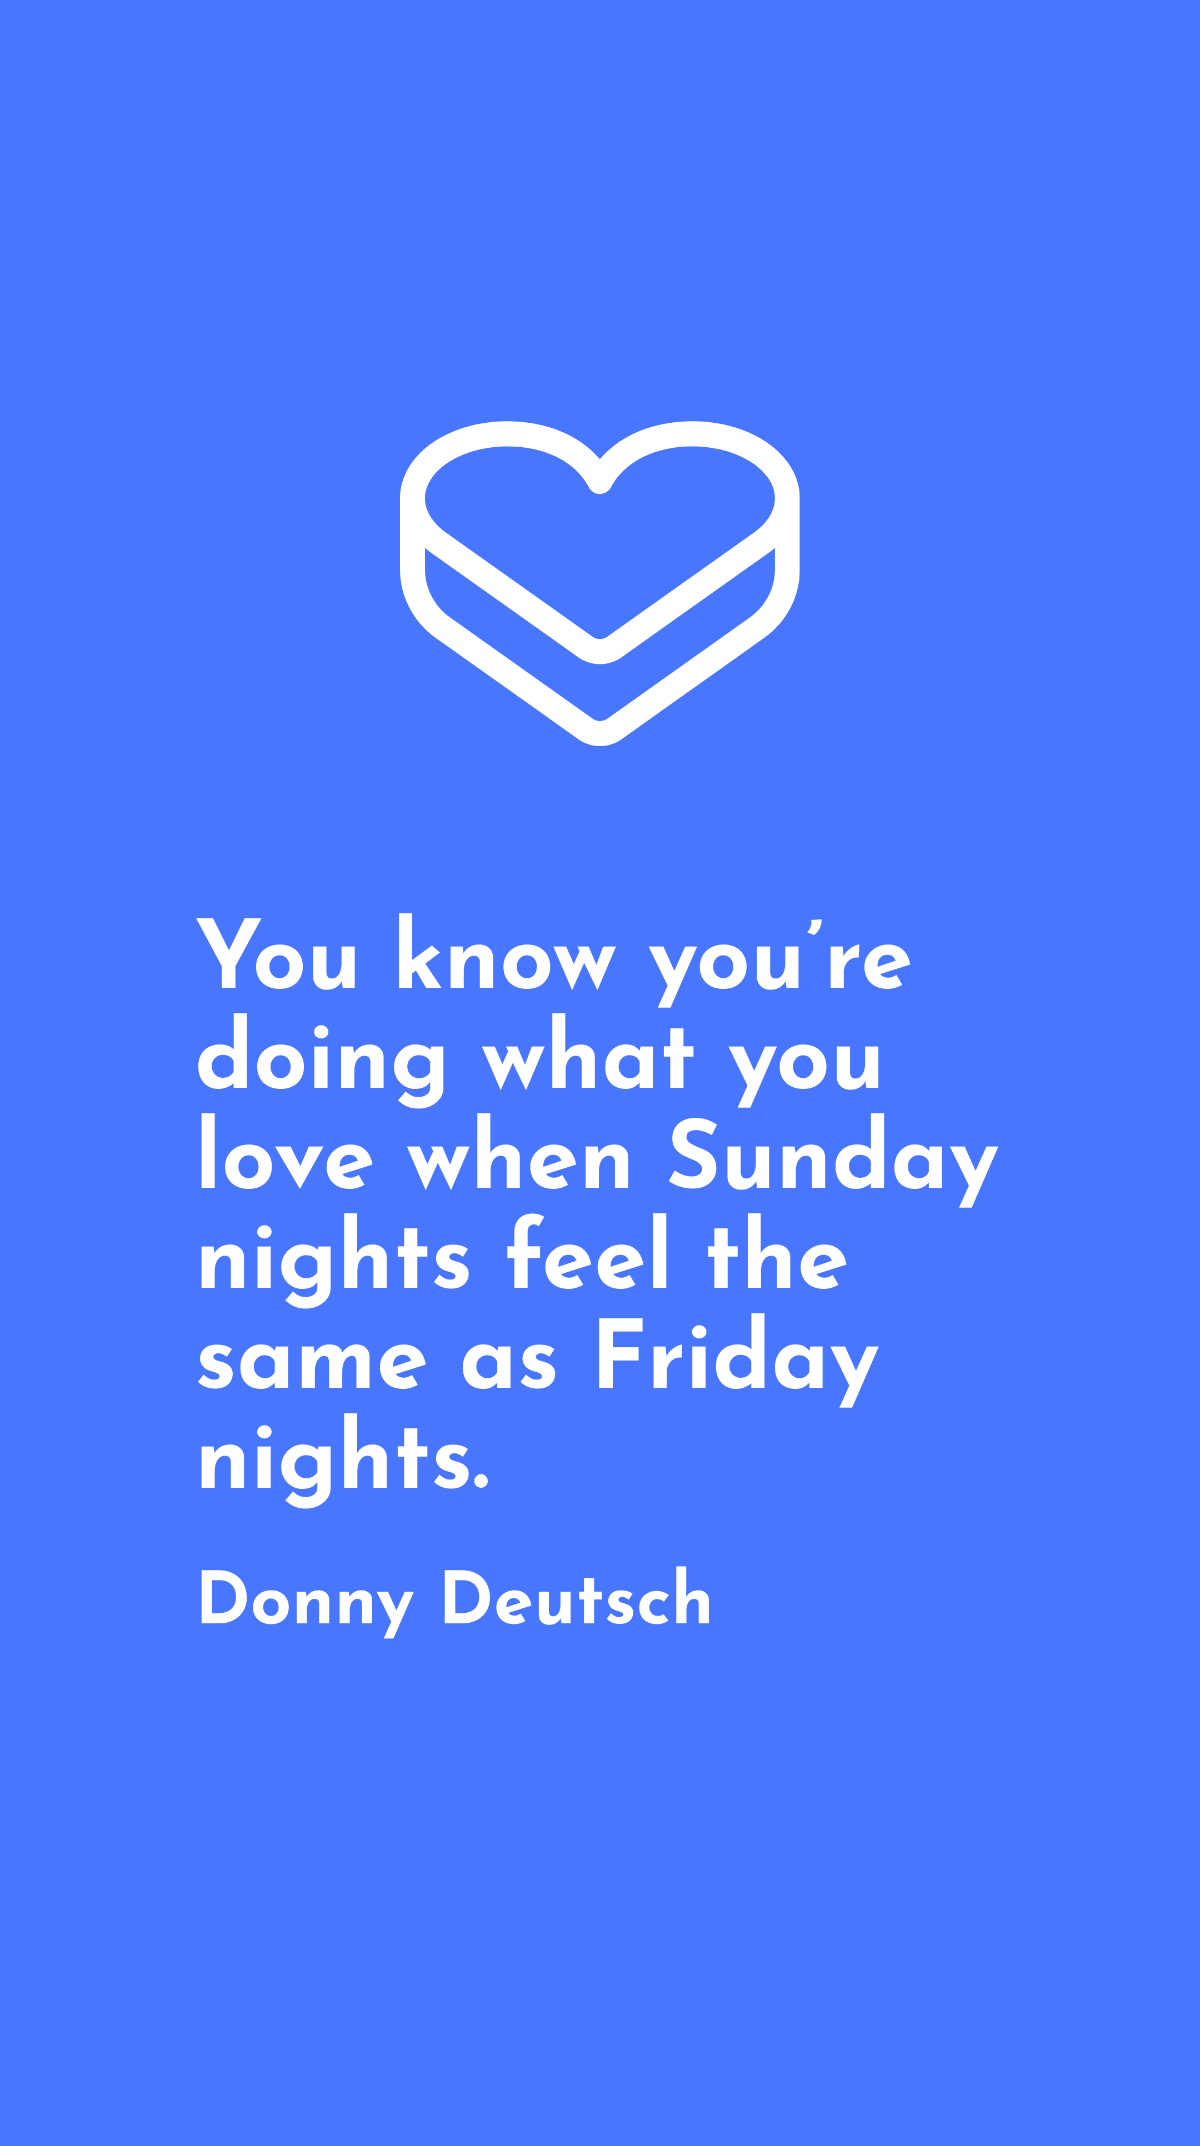 Donny Deutsch - You know you’re doing what you love when Sunday nights feel the same as Friday nights. Template